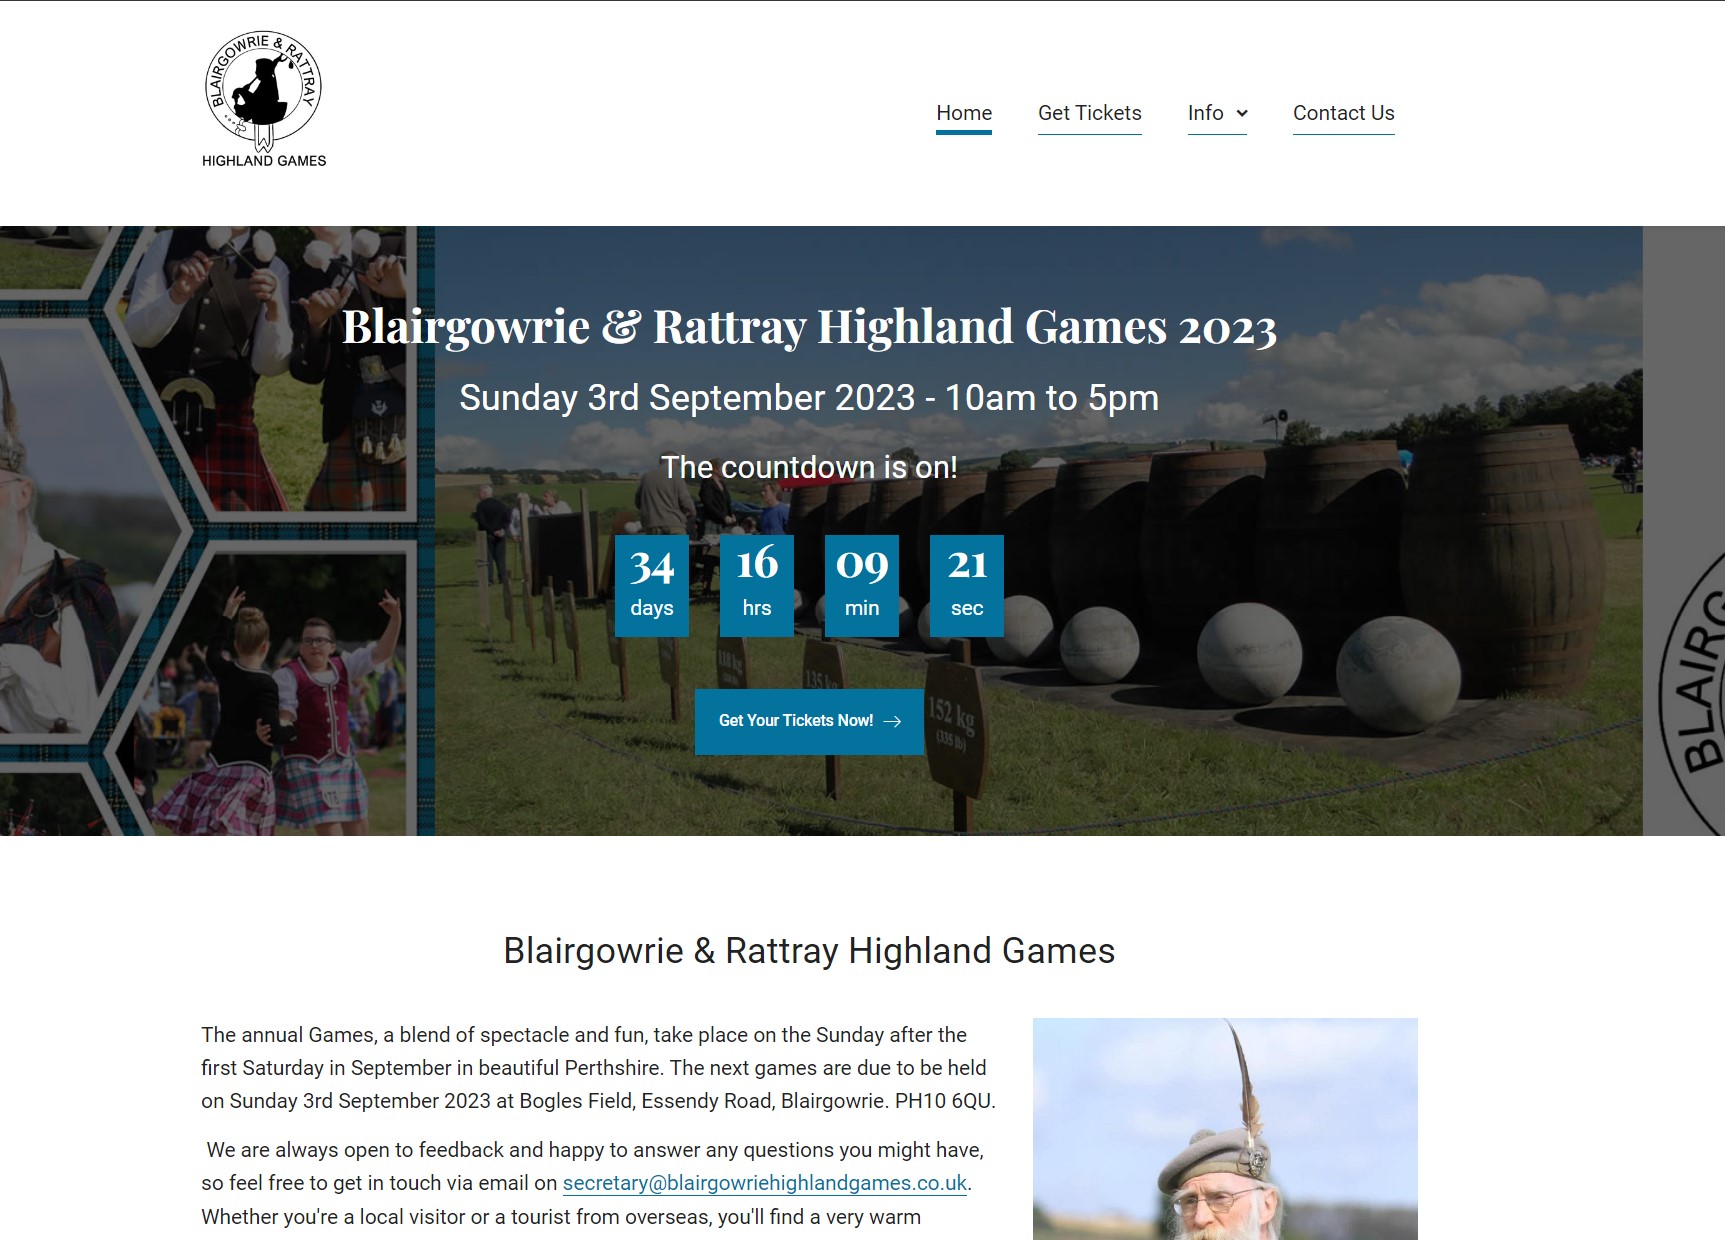 New website for Blairgowrie & Rattray Highland Games - 2023